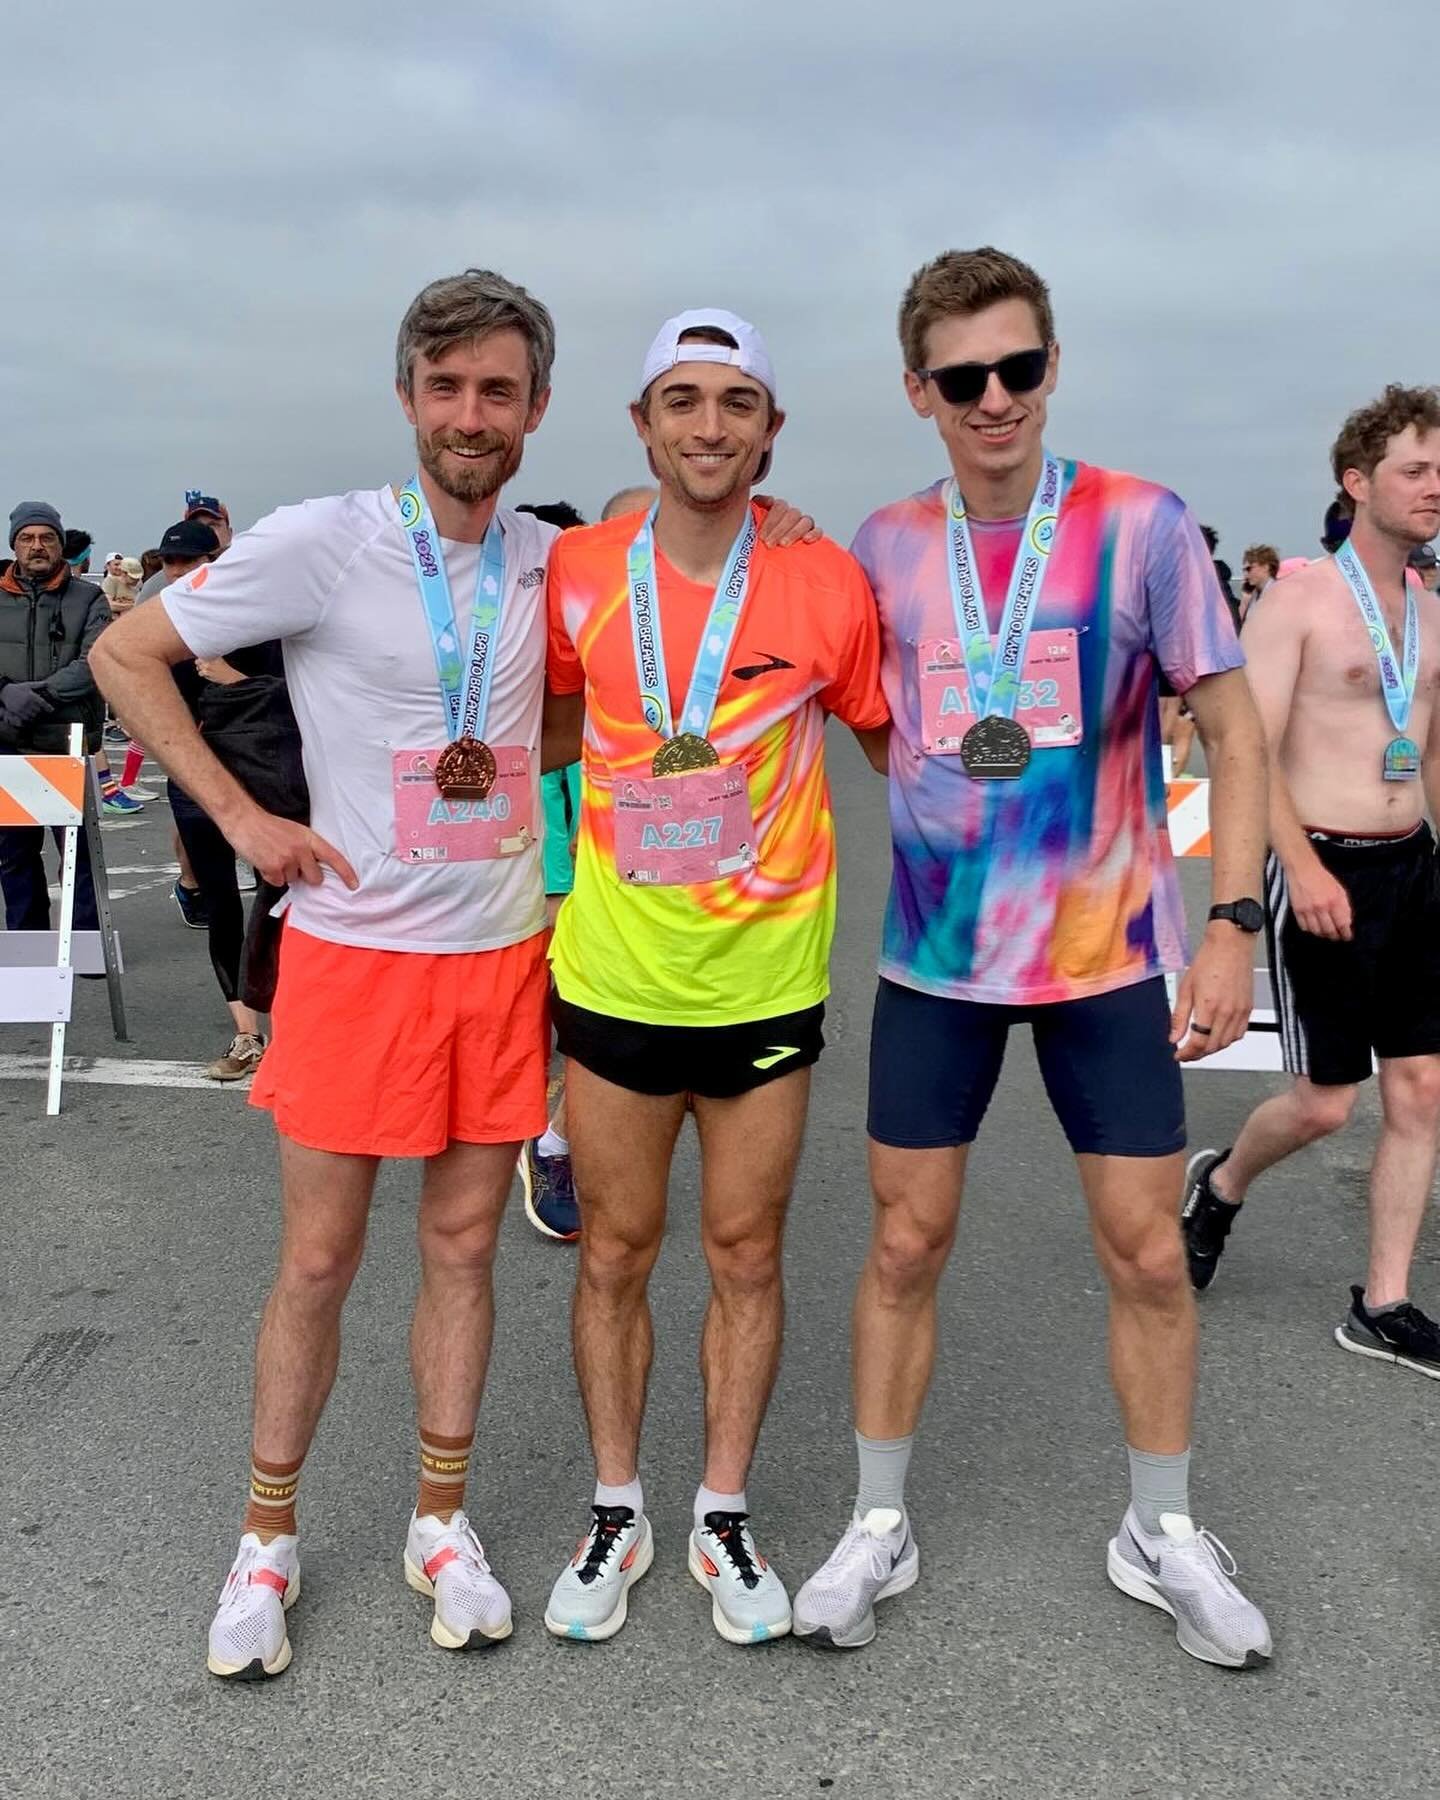 My patients had some outstanding performances @baytobreakers yesterday! 

@colin_bennie finished 🥇 with the an almost 2 minute lead and @poleary87 finishes in 🥉 with a super strong finish (missing second by only a few seconds!)

@calcalamia finishe